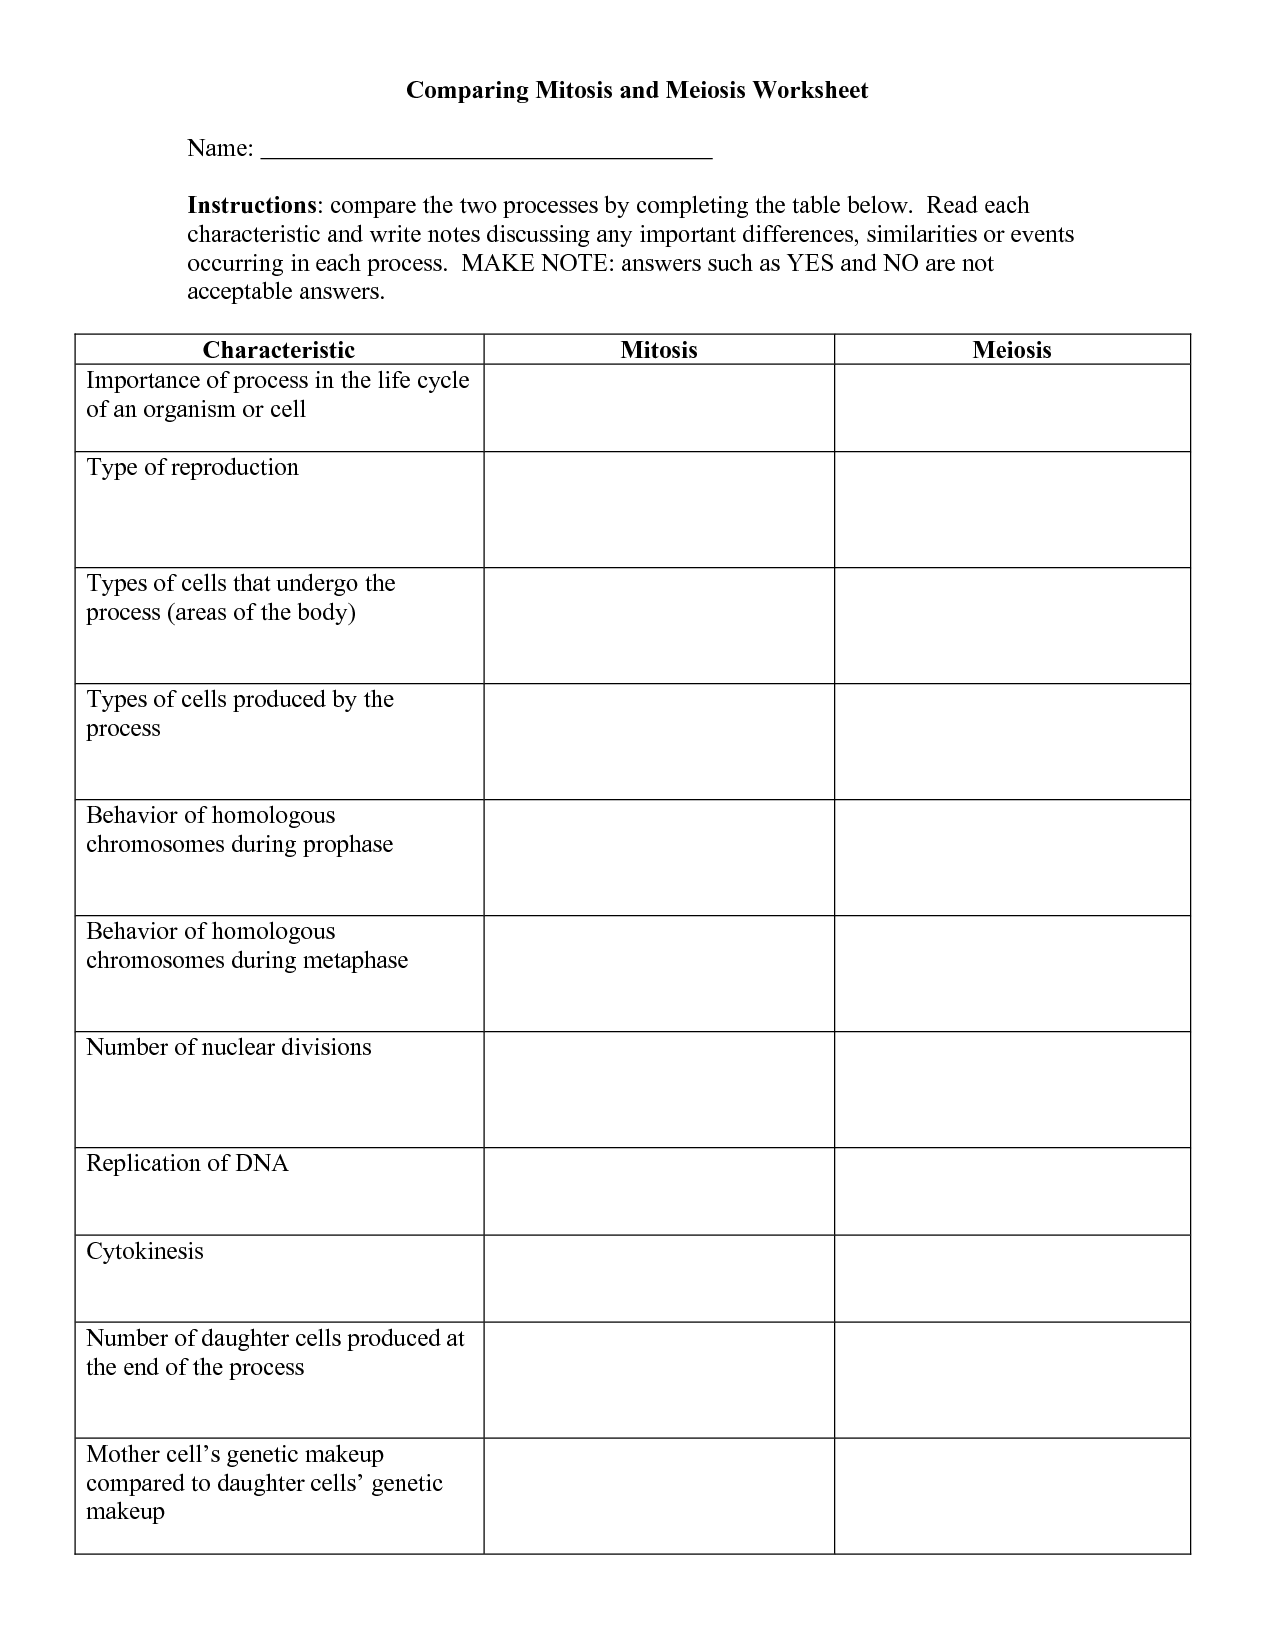 worksheet-comparing-mitosis-and-meiosis-worksheet-answers-grass-fedjp-worksheet-study-site